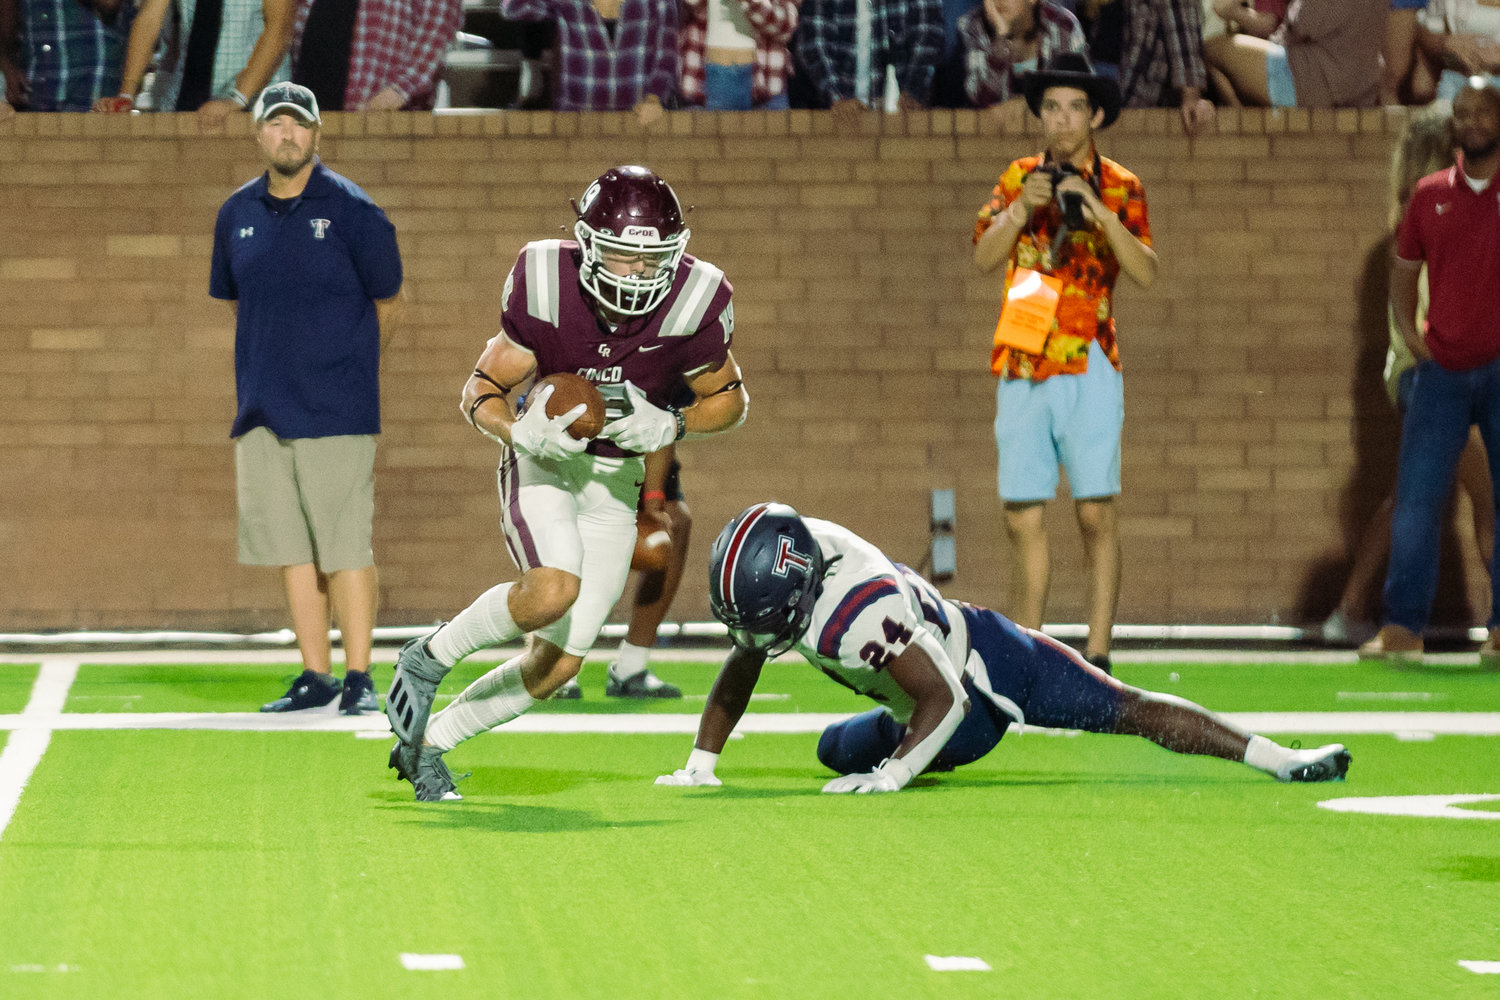 Cinco Ranch’s Seth Salverino breaks upfield after a catch during Friday’s game between Cinco Ranch and Tompkins at Rhodes Stadium.